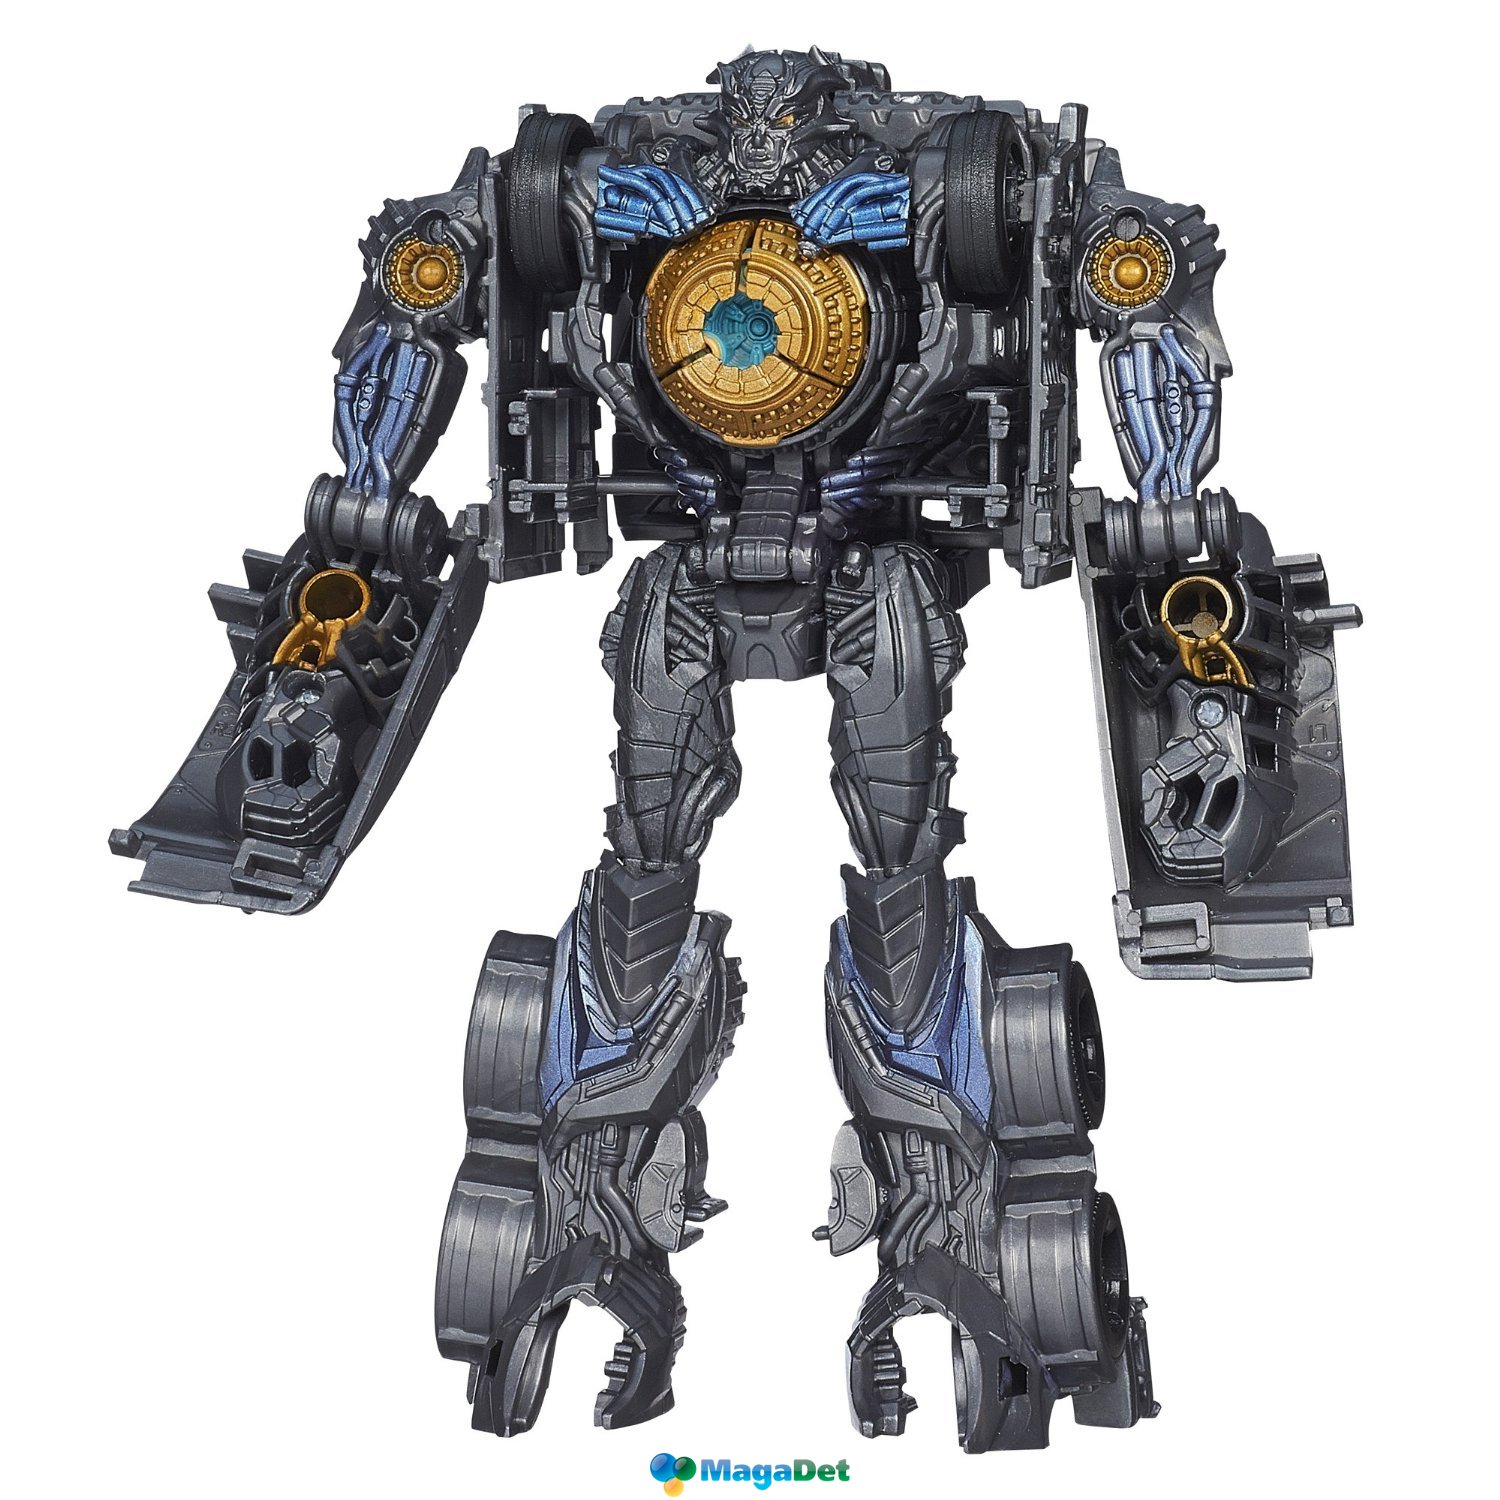 Transformers: Age of Extinction Voyager Galvatron